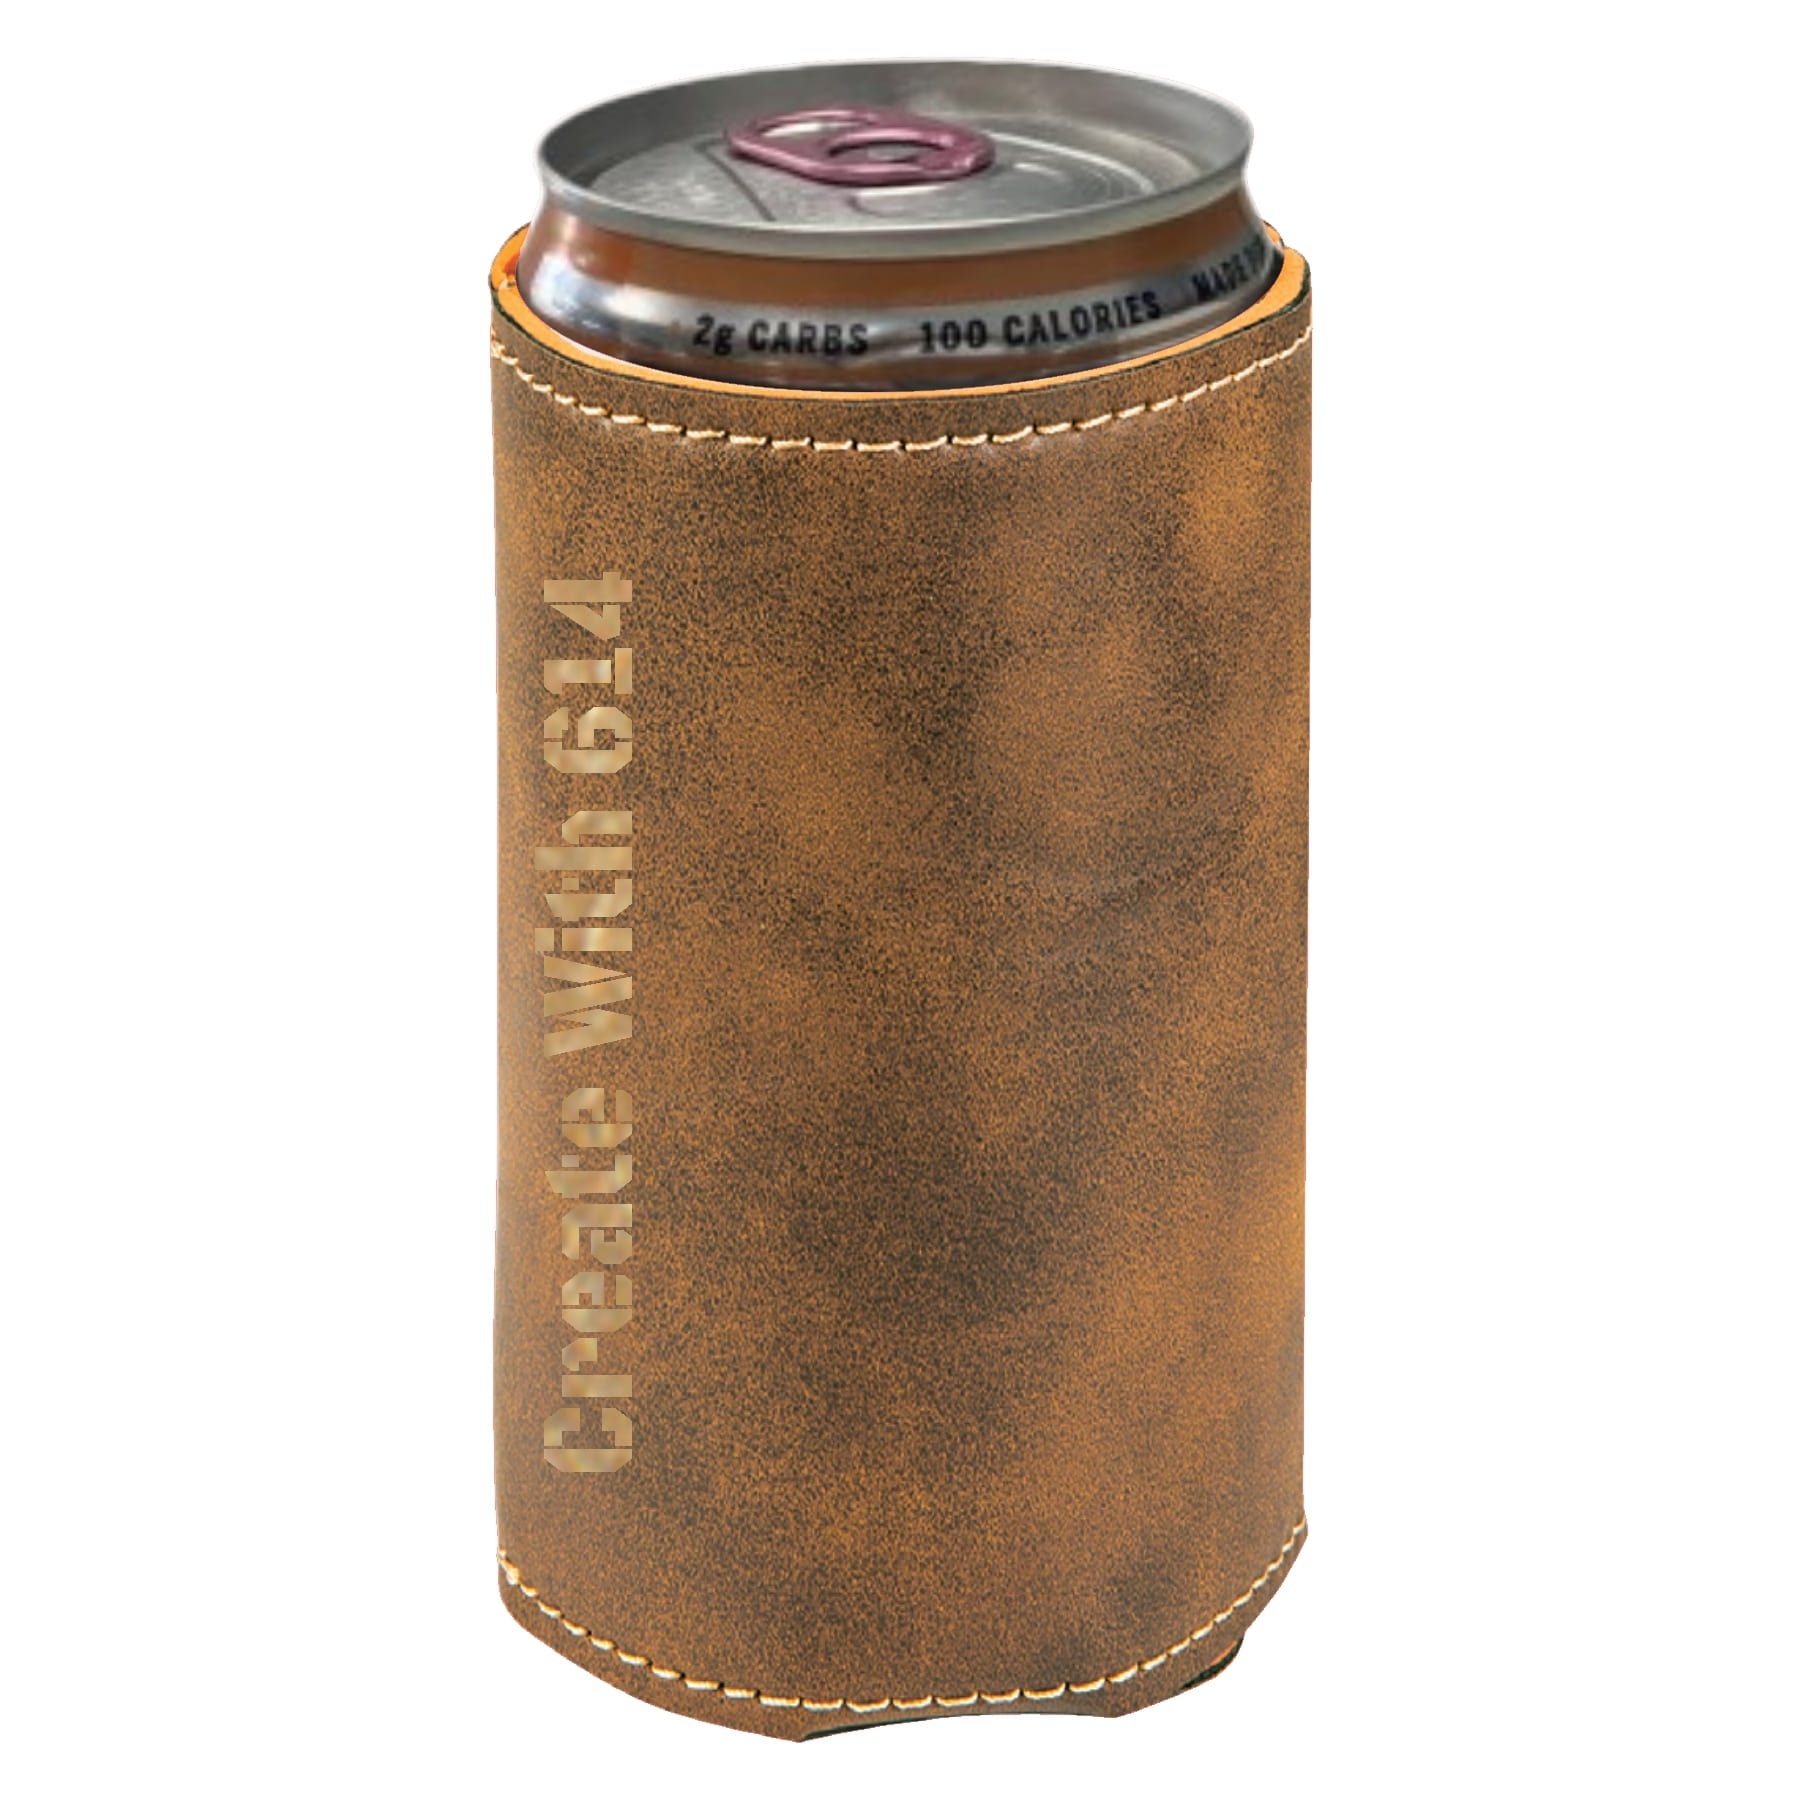 Campaign Leather Can Koozie by Mission Mercantile – Studio 3:19